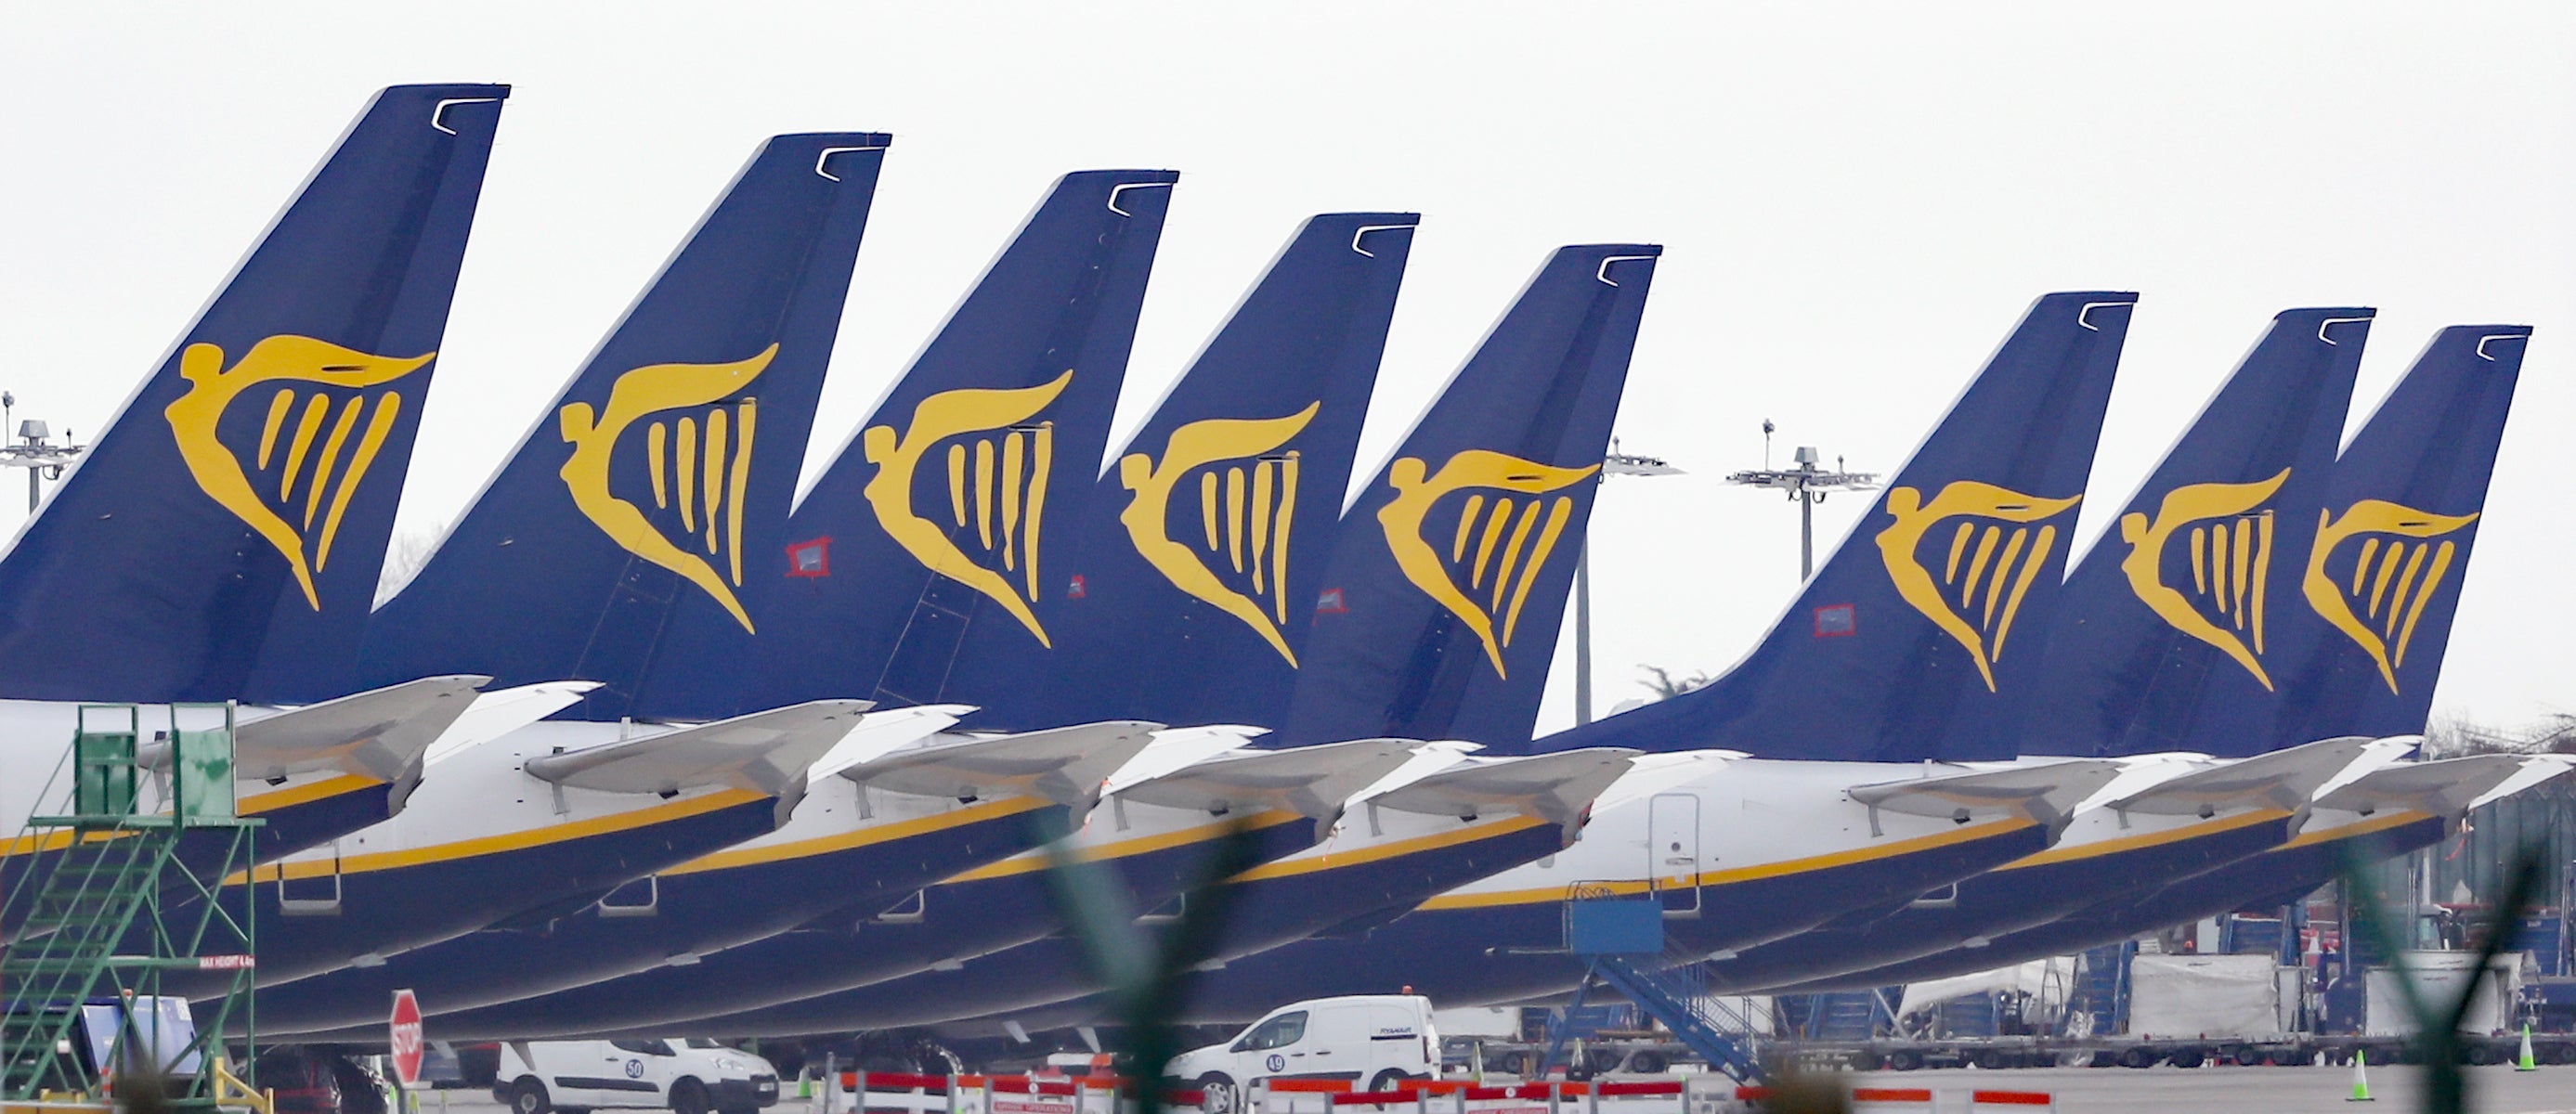 Ryanair has failed in its bid to overturn a court ruling that it cannot avoid paying compensation to passengers affected by industrial action (Niall Carson/PA)